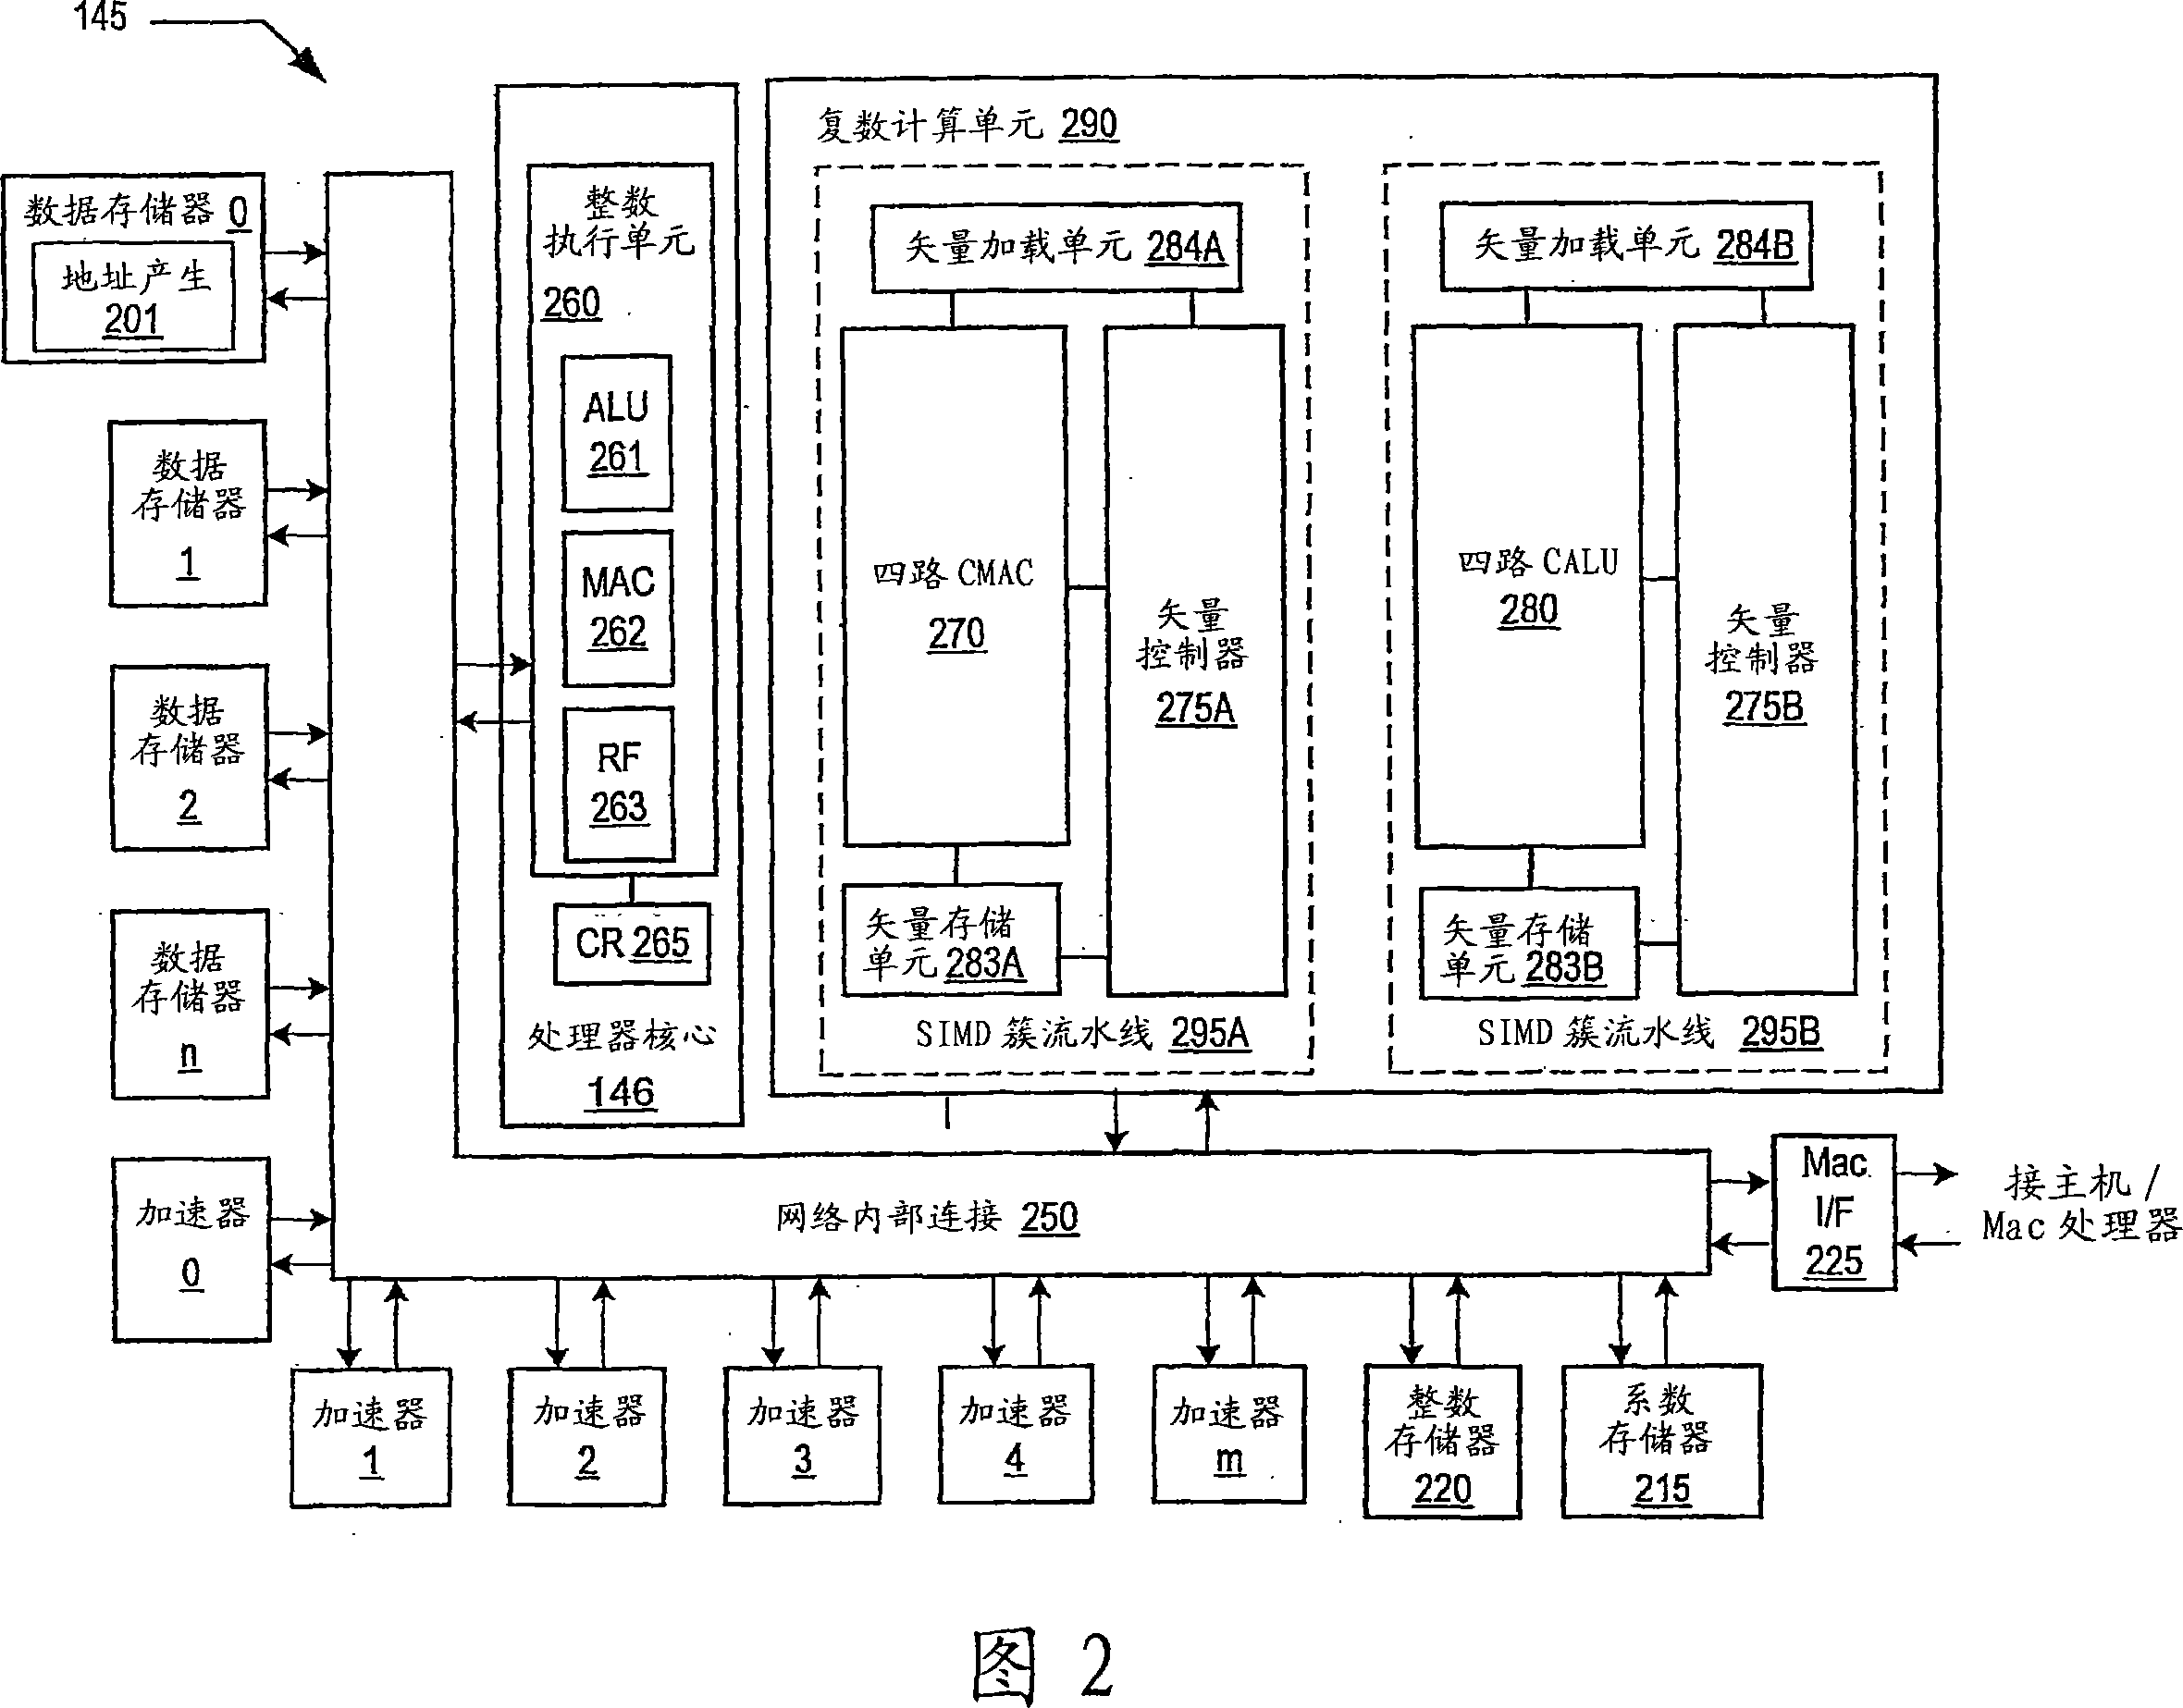 Programmable digital signal processor having a clustered SIMD microarchitecture including a complex short multiplier and an independent vector load unit